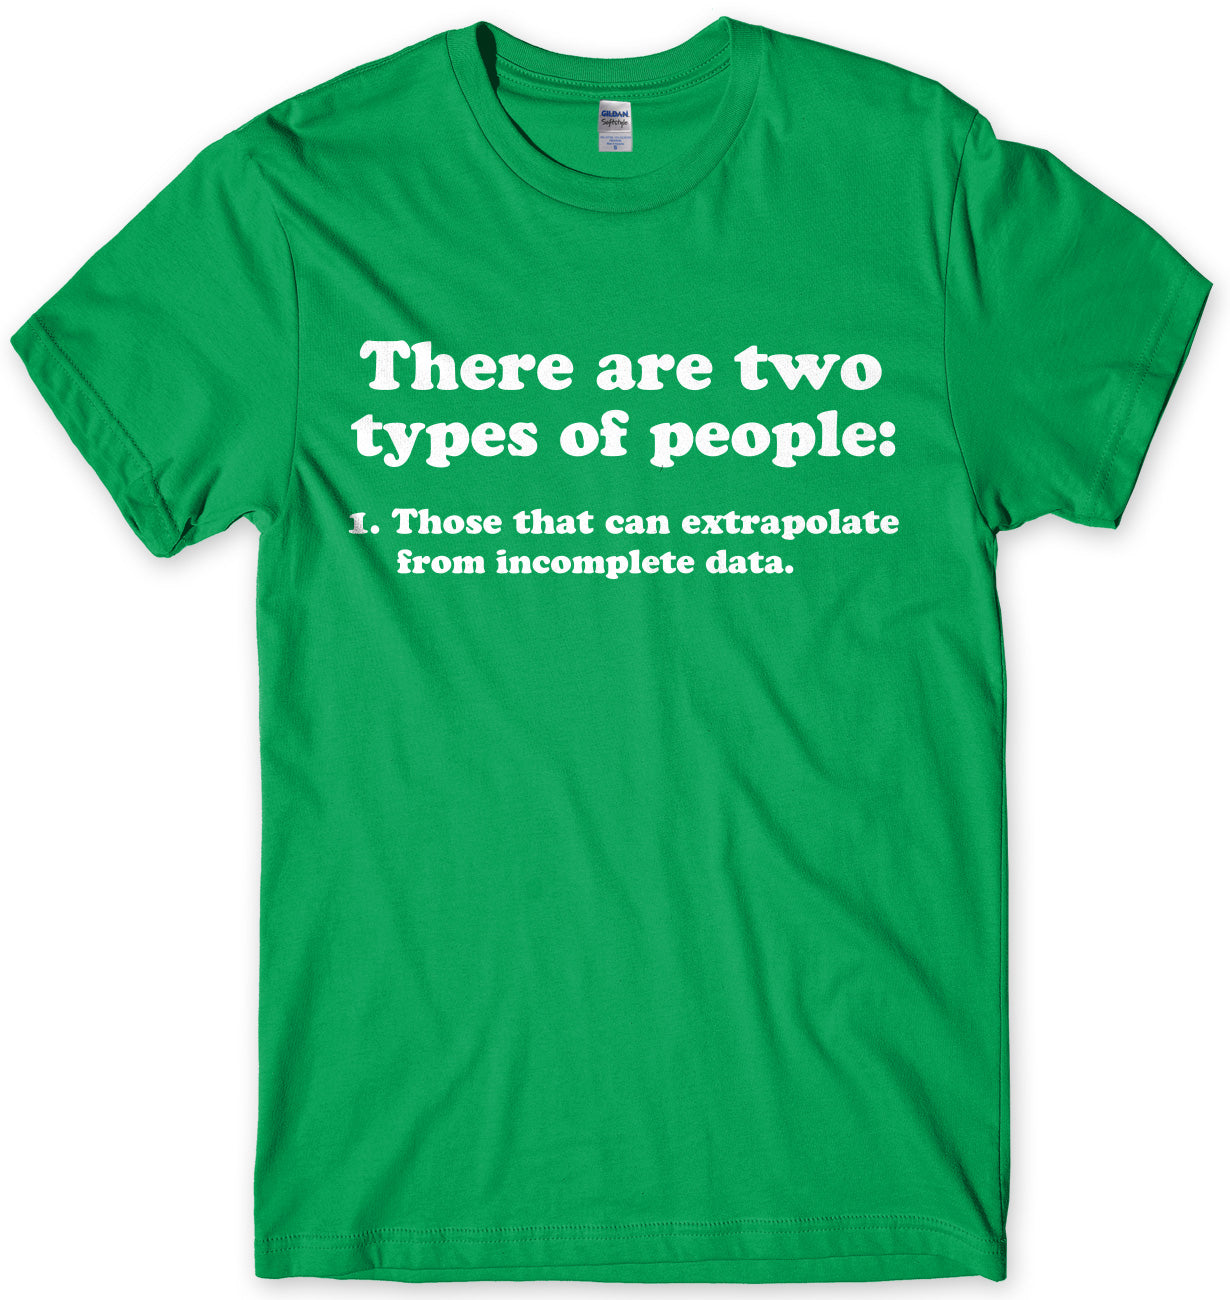 There Are Two Types Of People: 1.Those That Can Extrapolate From Incomplete Data Mens Unisex T-Shirt